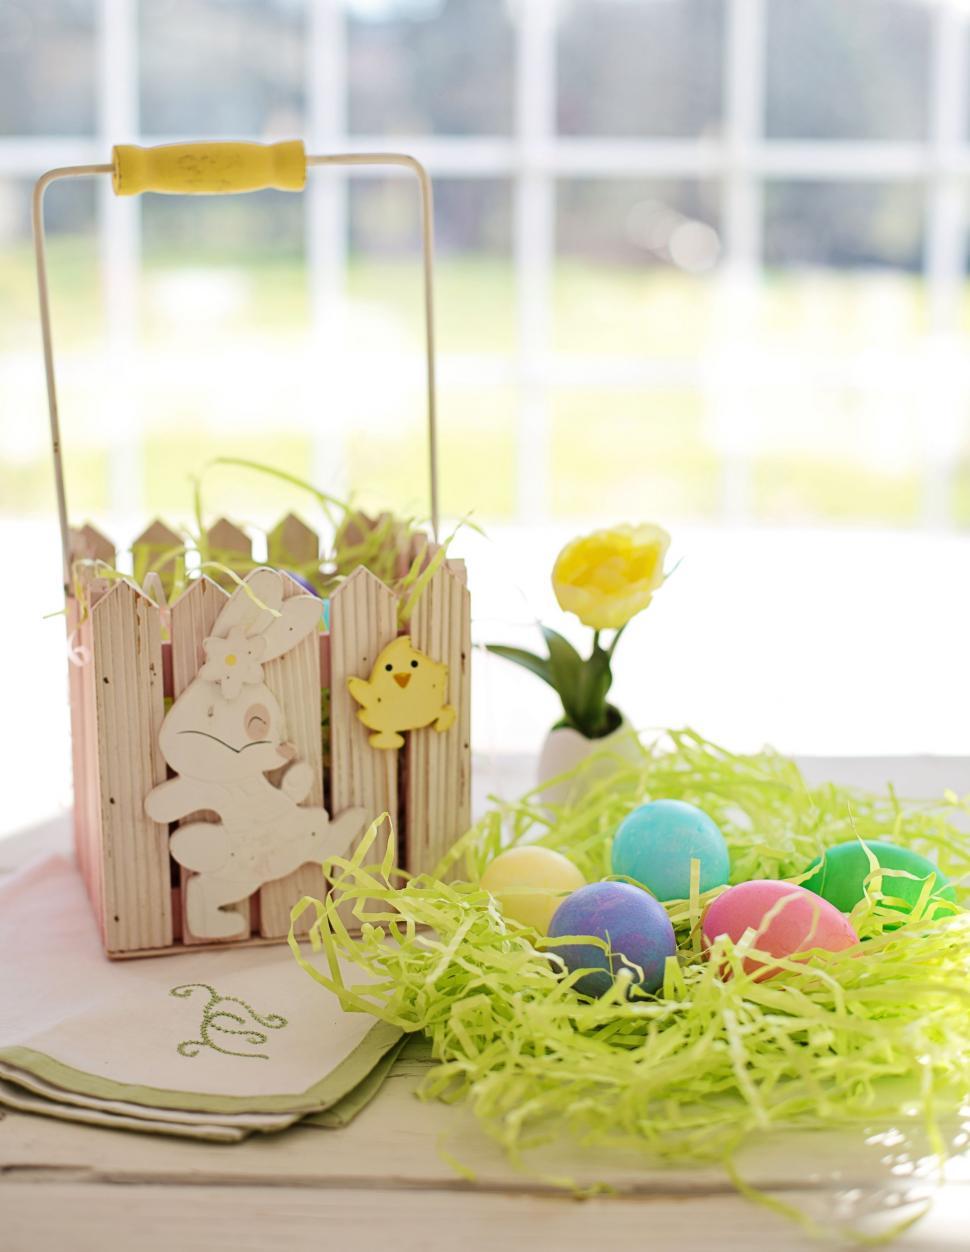 Free Image of Easter Eggs and Yellow Flower 